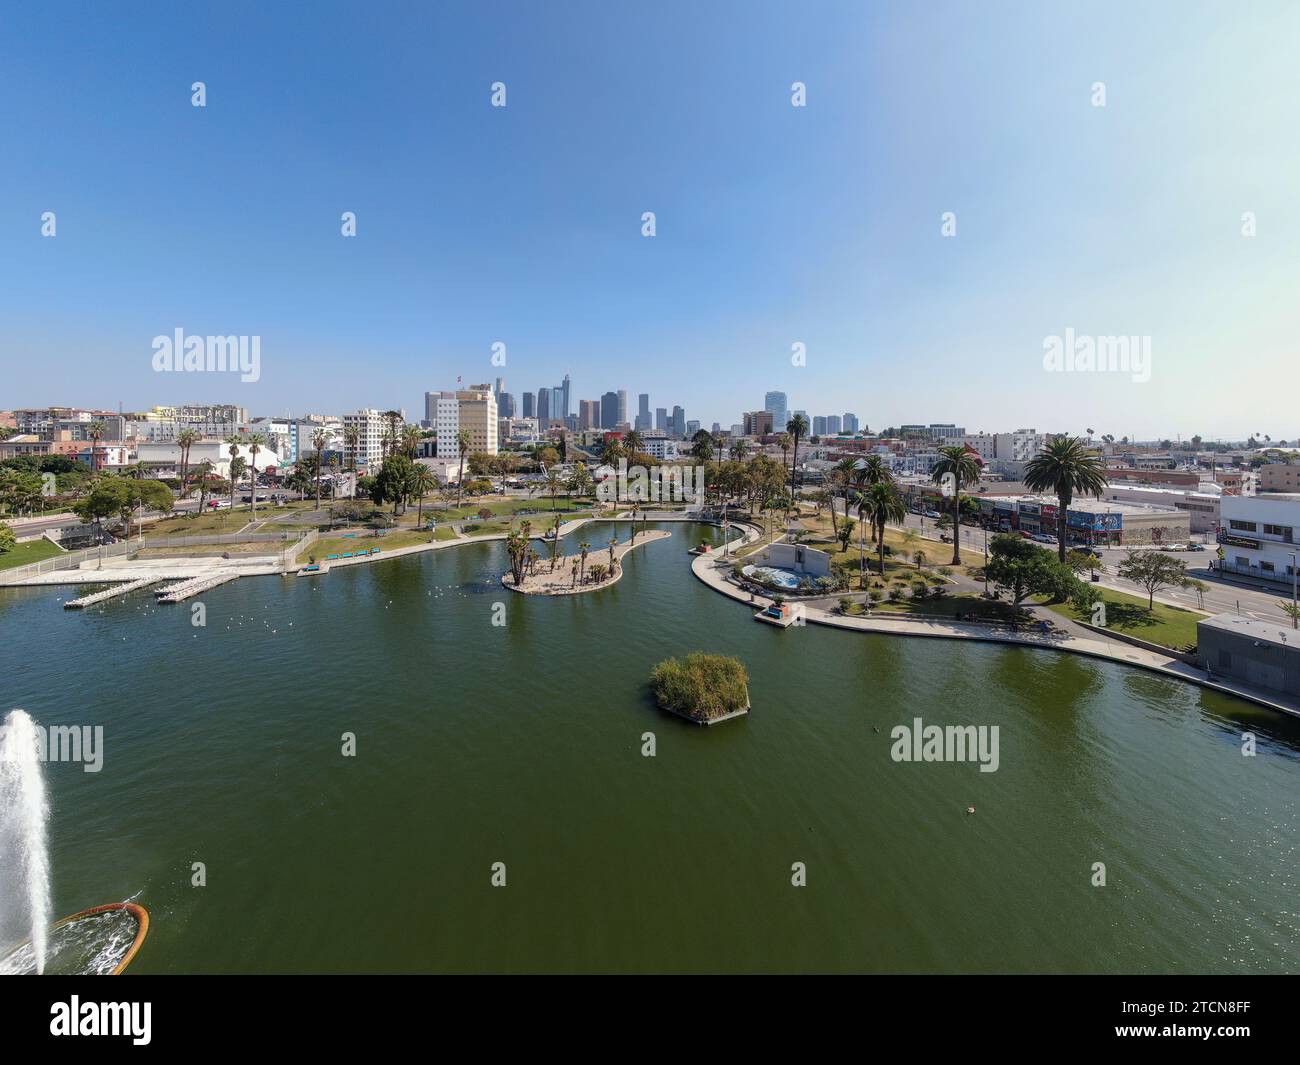 Stock drone images of downtown los angeles and macarthur park Stock Photo